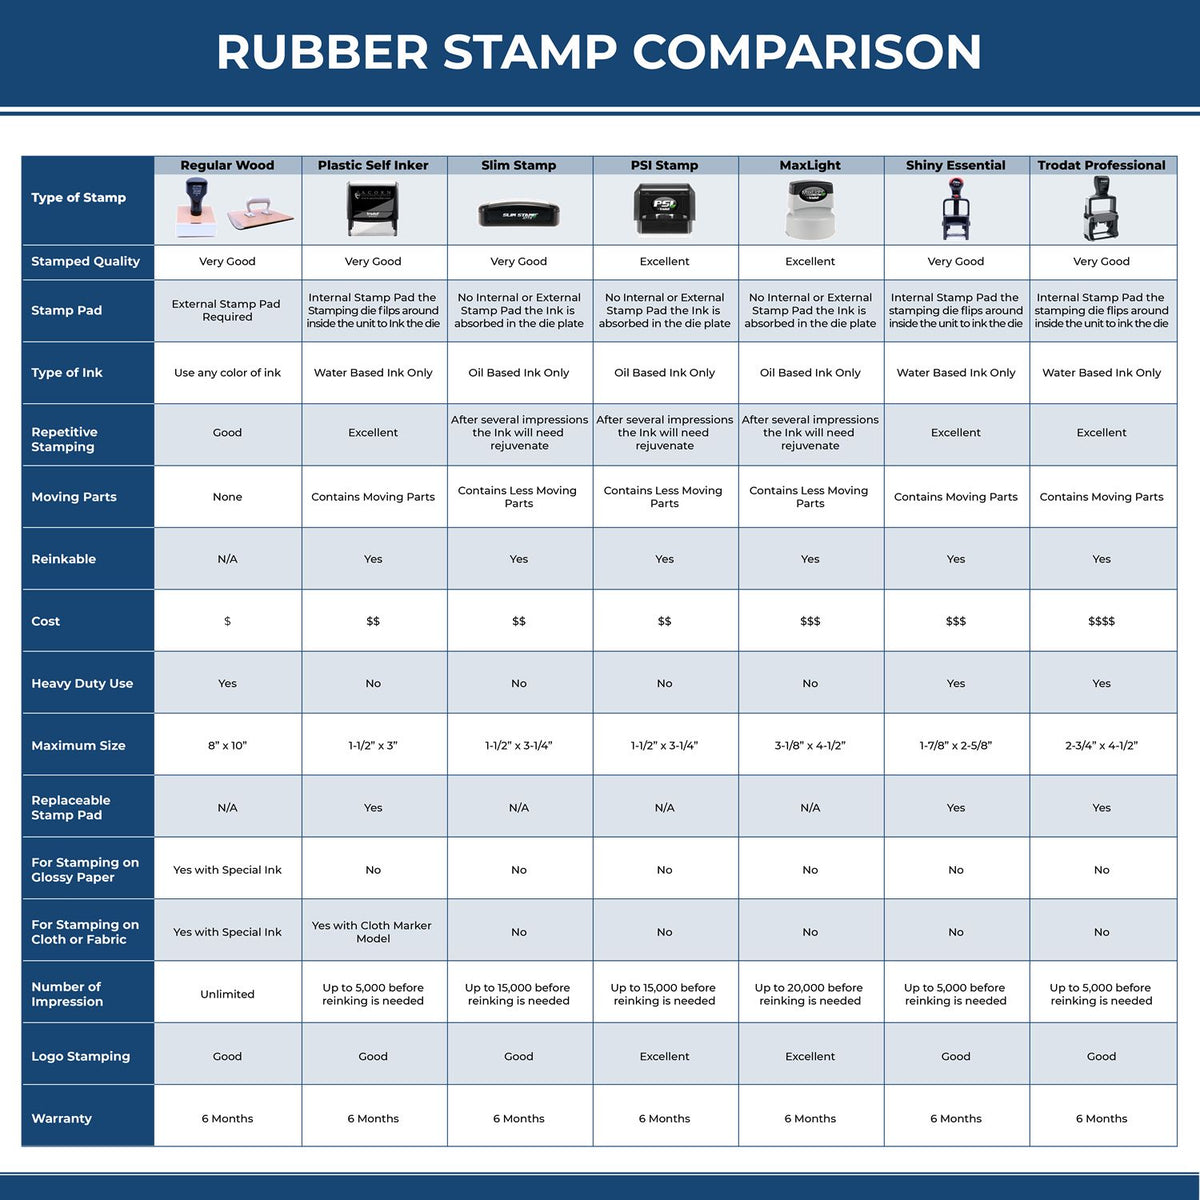 Keep Practicing Needs Improvement Rubber Stamp 4387R Rubber Stamp Comparison